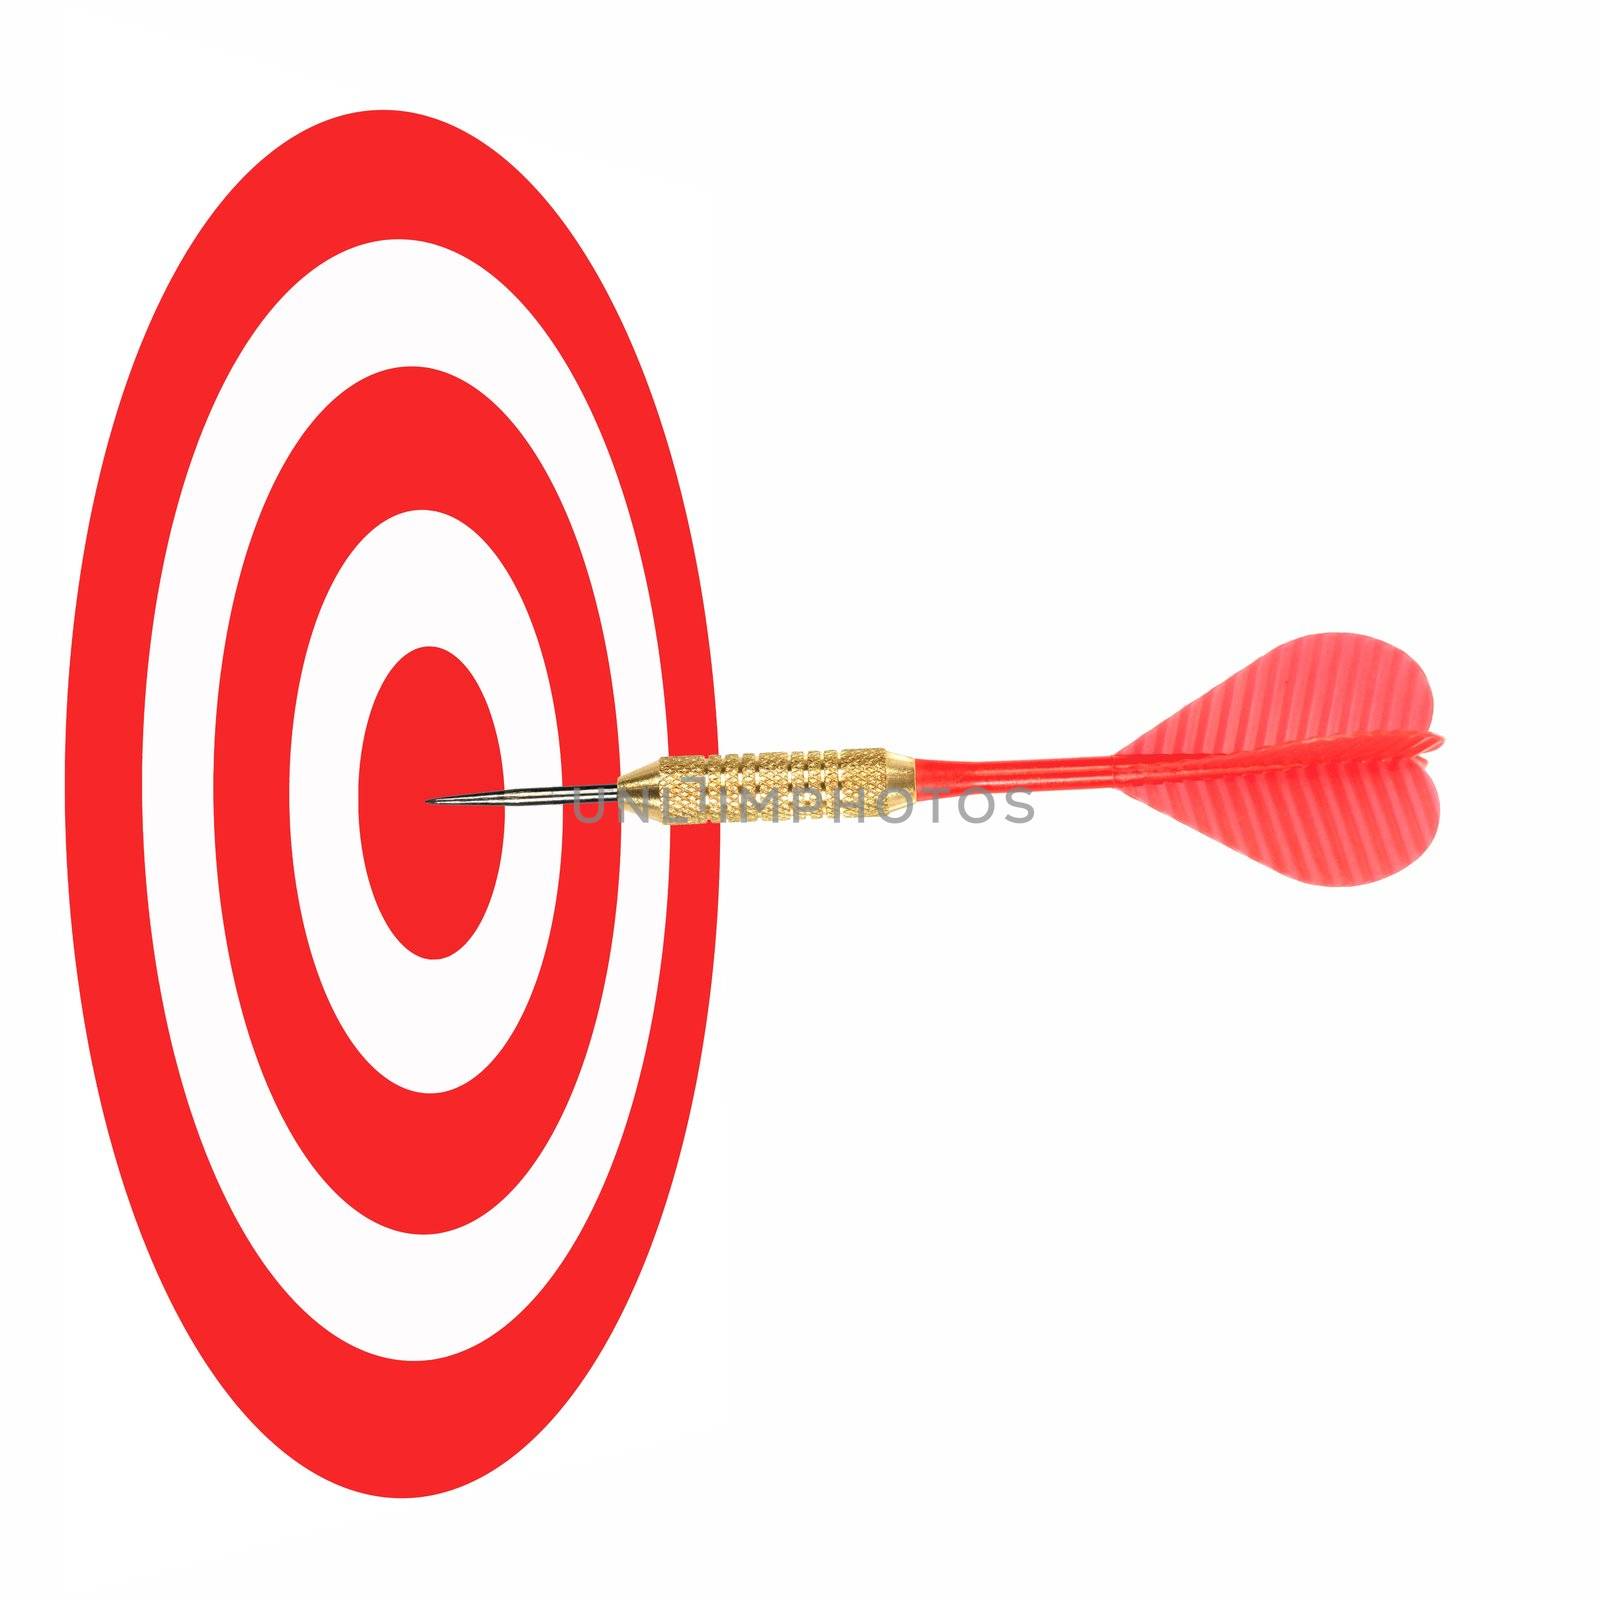 Playing darts isolated against a white background